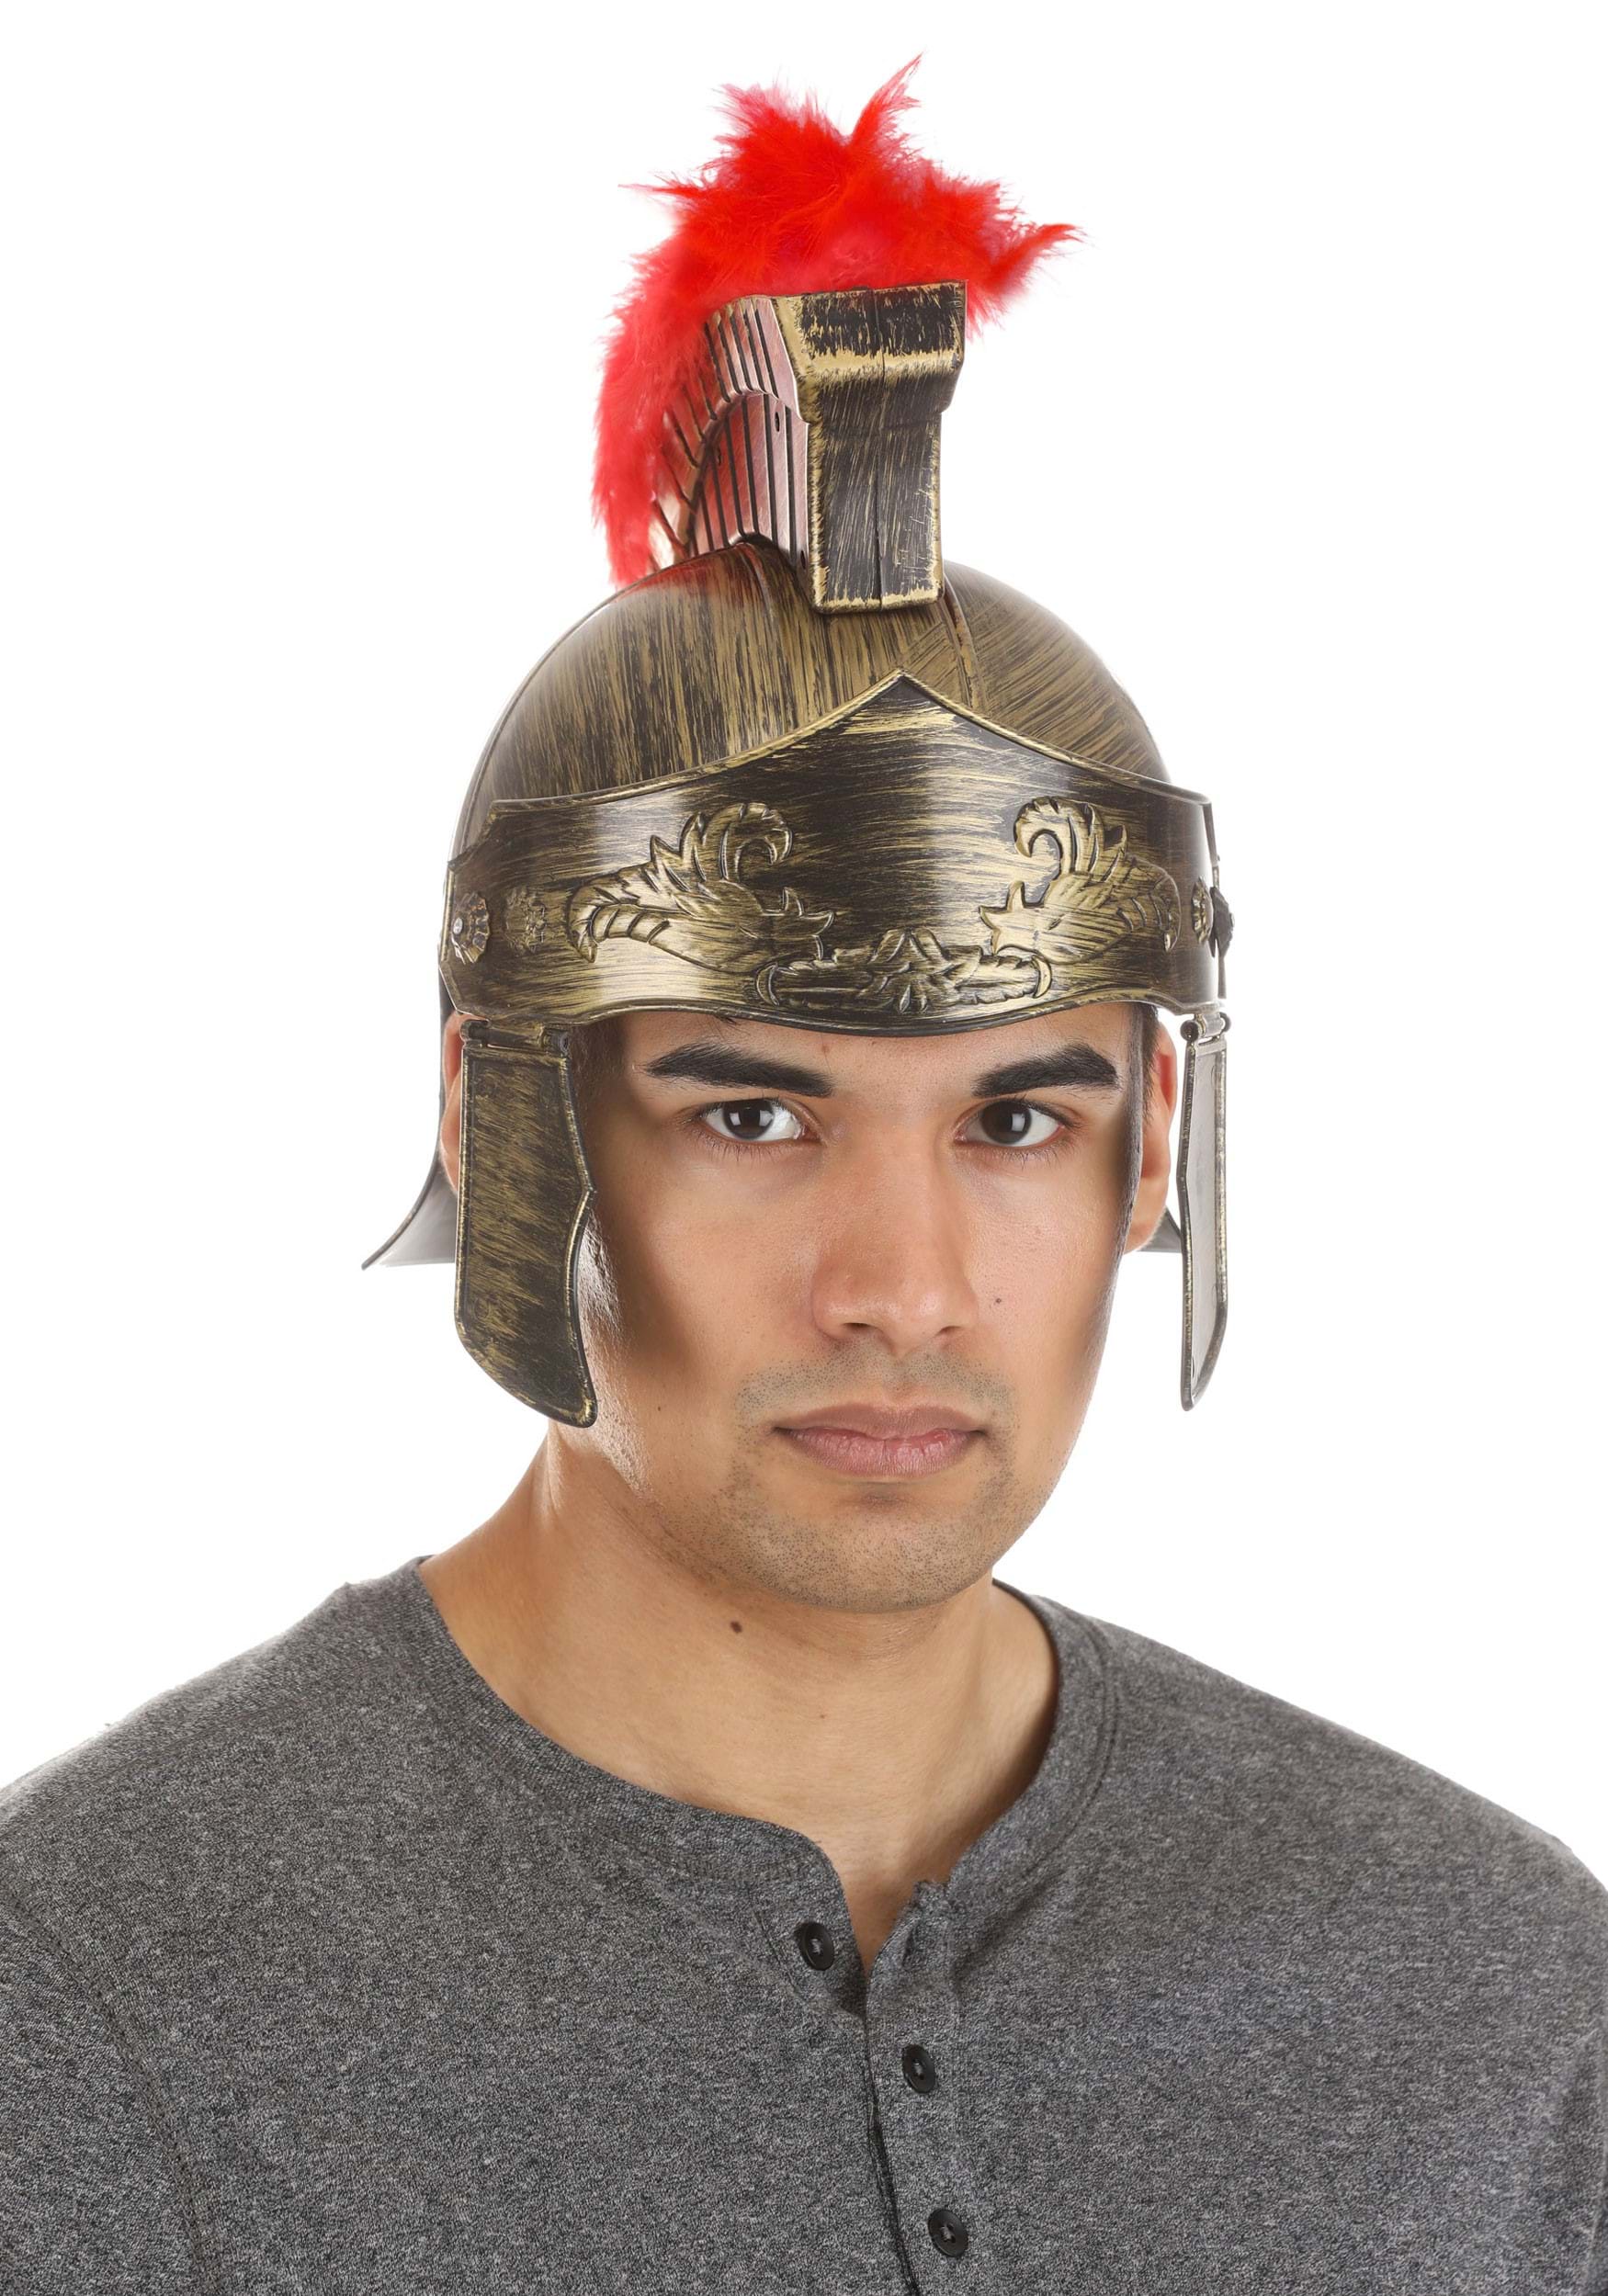 Gladiator Red Feather Costume Helmet For Adults